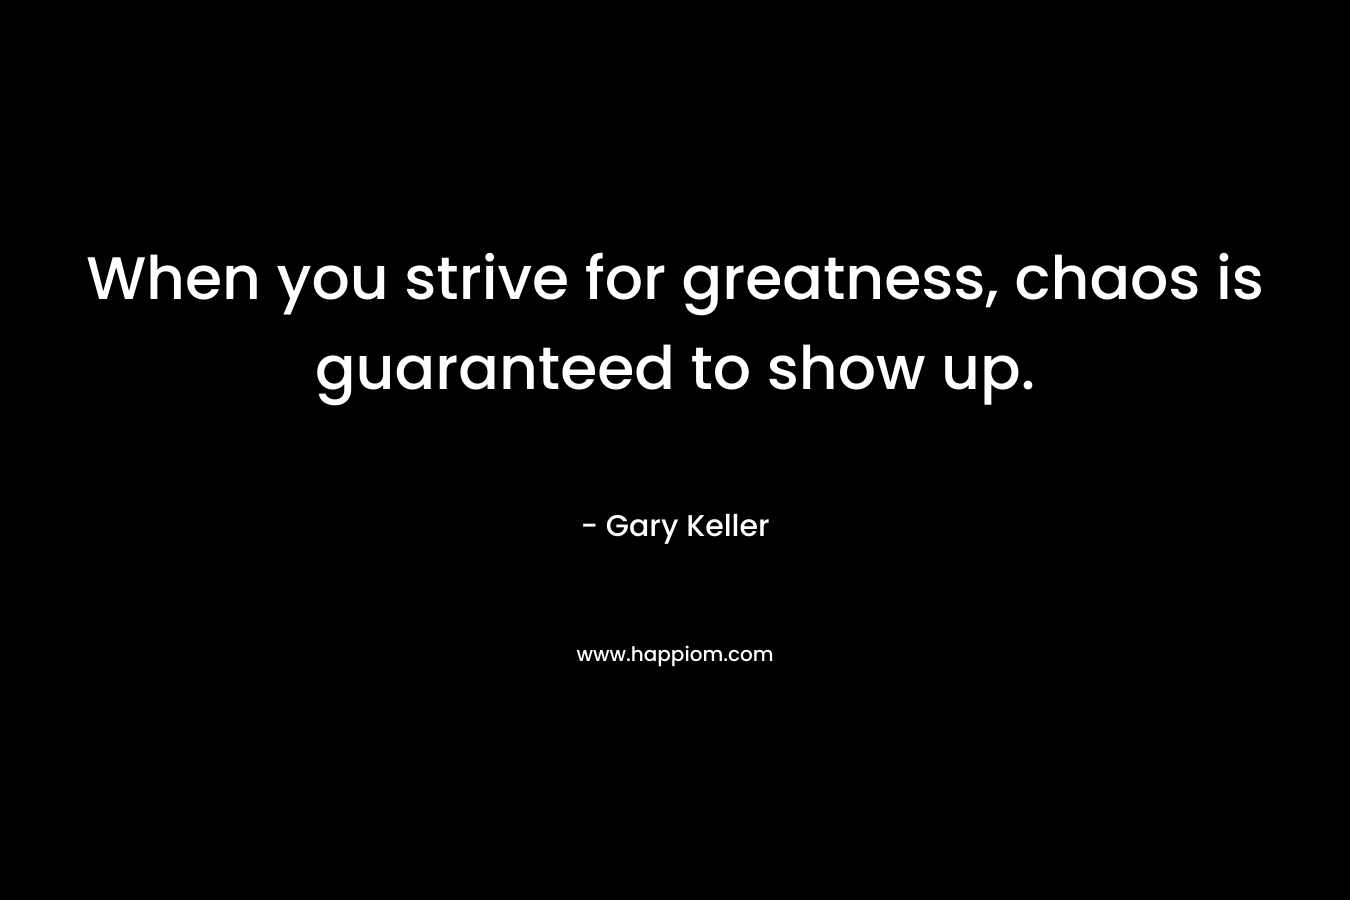 When you strive for greatness, chaos is guaranteed to show up. – Gary Keller